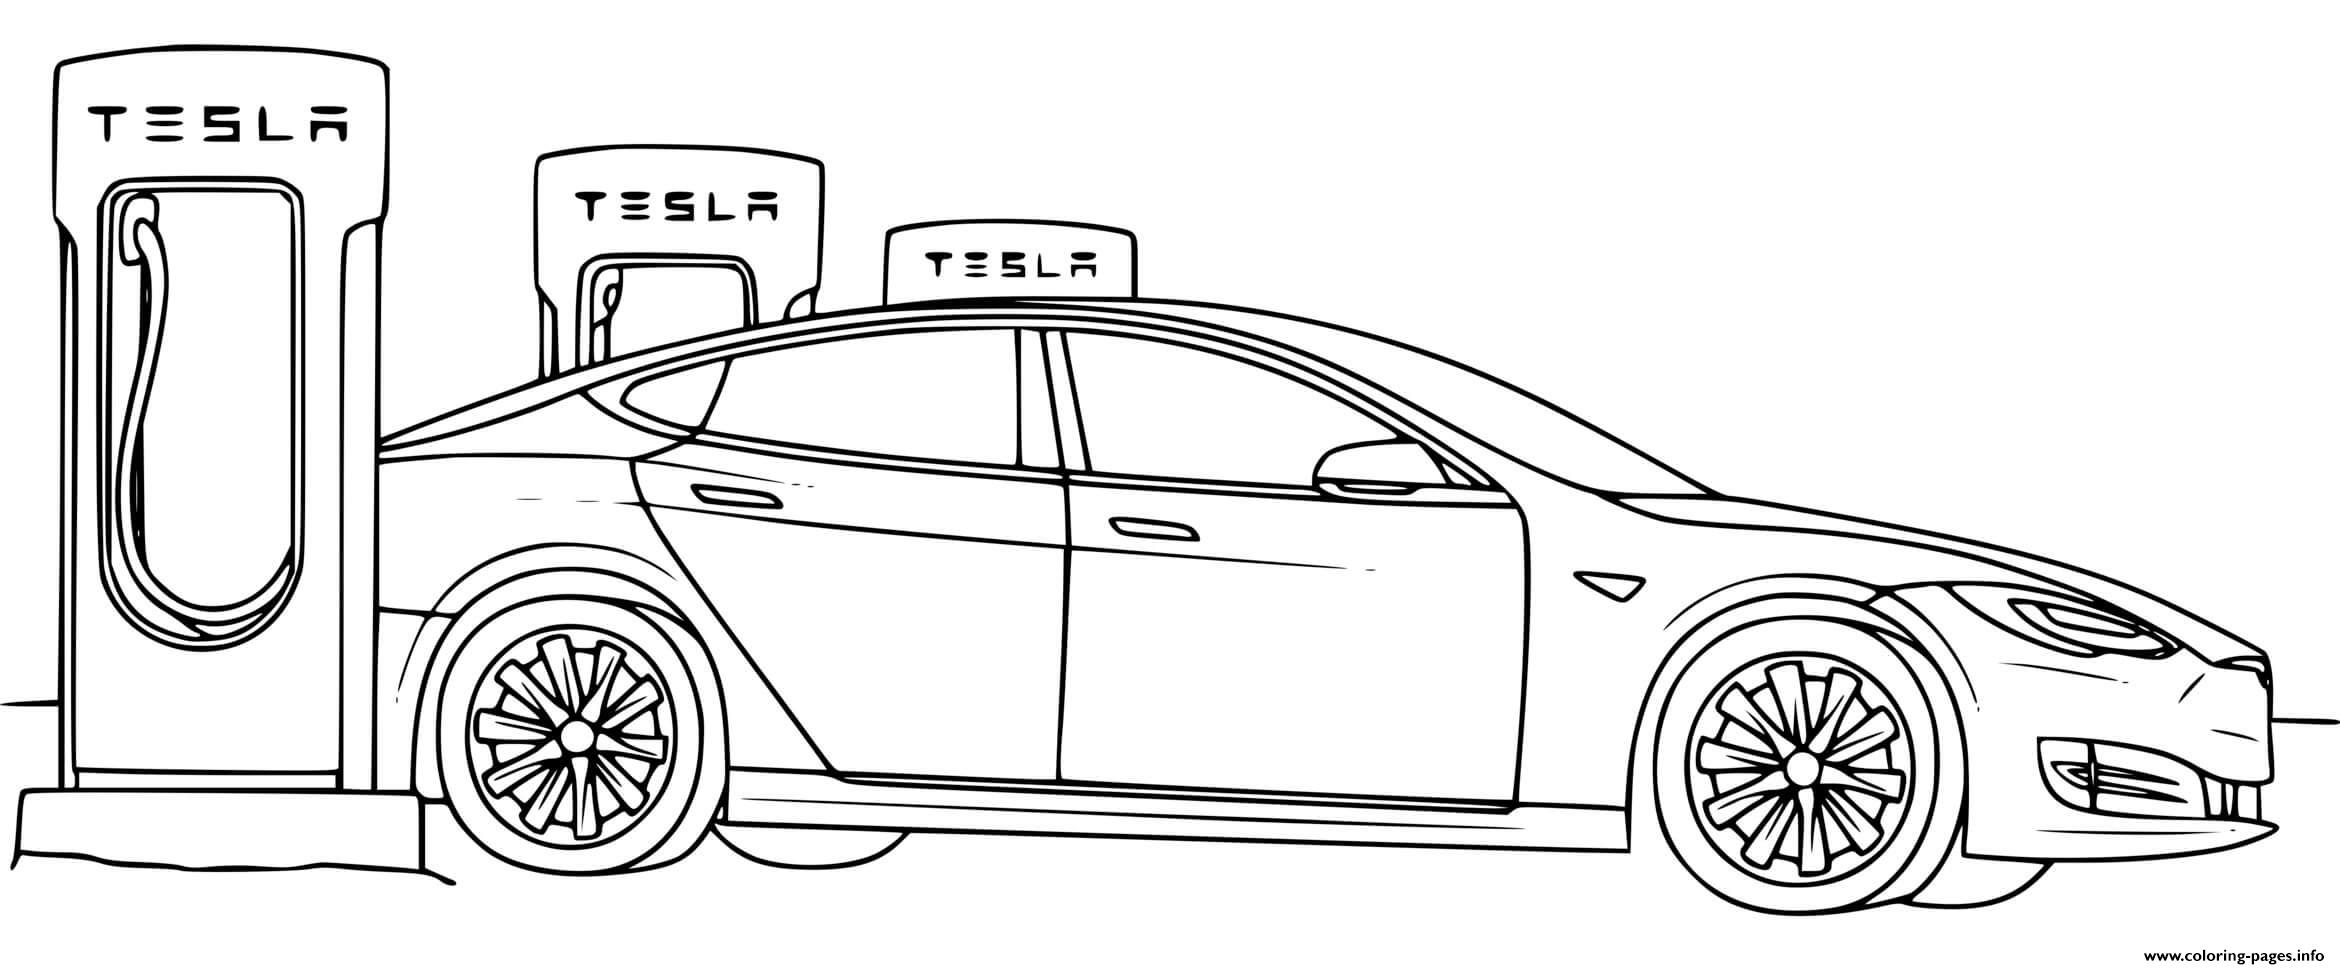 Modern Electric Service Stations Of Tesla coloring